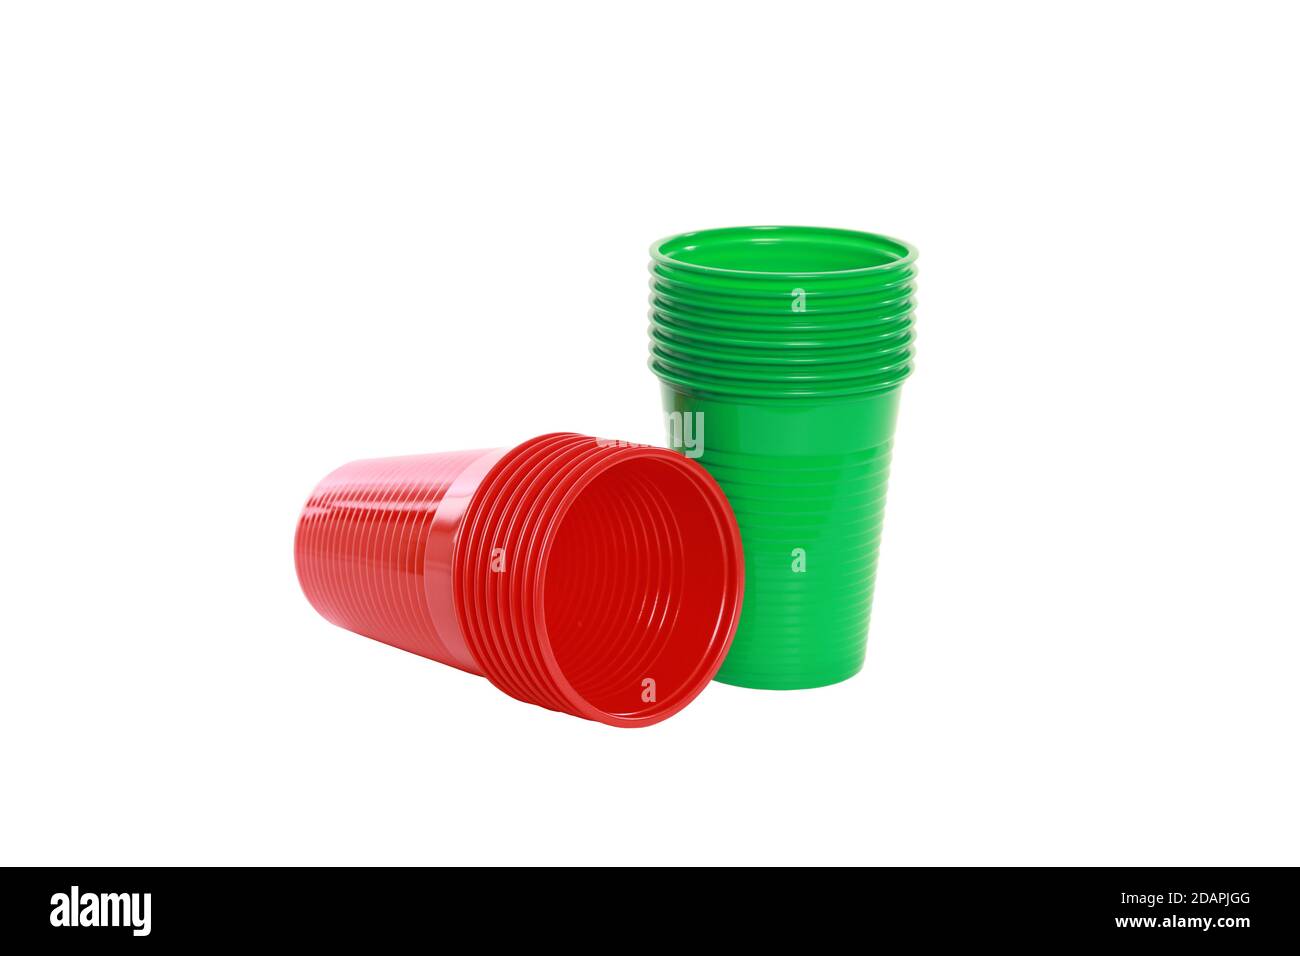 https://c8.alamy.com/comp/2DAPJGG/closeup-shot-of-red-and-green-plastic-disposable-cups-isolated-on-white-background-2DAPJGG.jpg